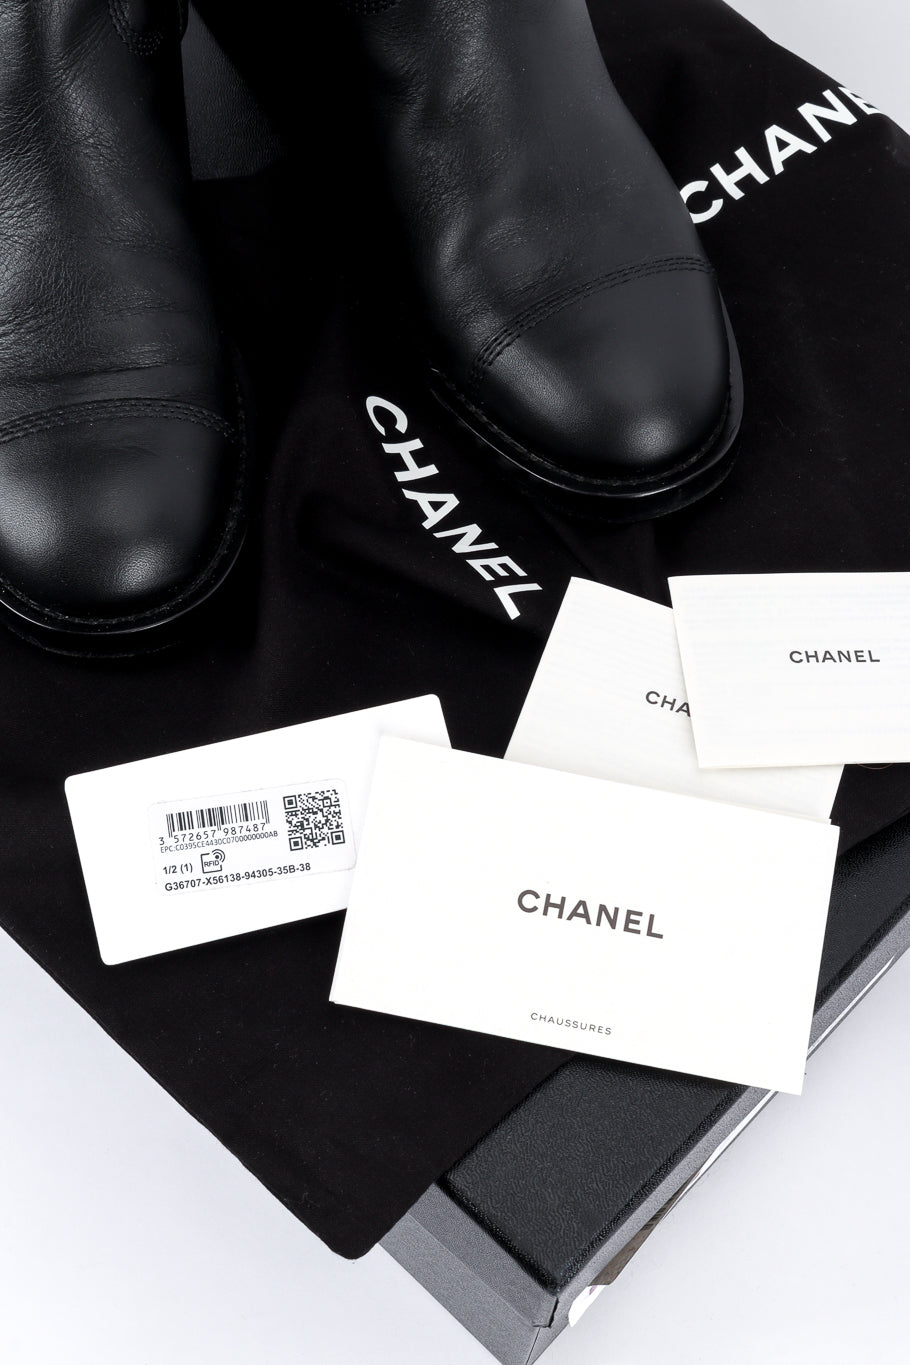 Chanel CC Quilted Mid-Calf Boots with box and pamphlets @recess la